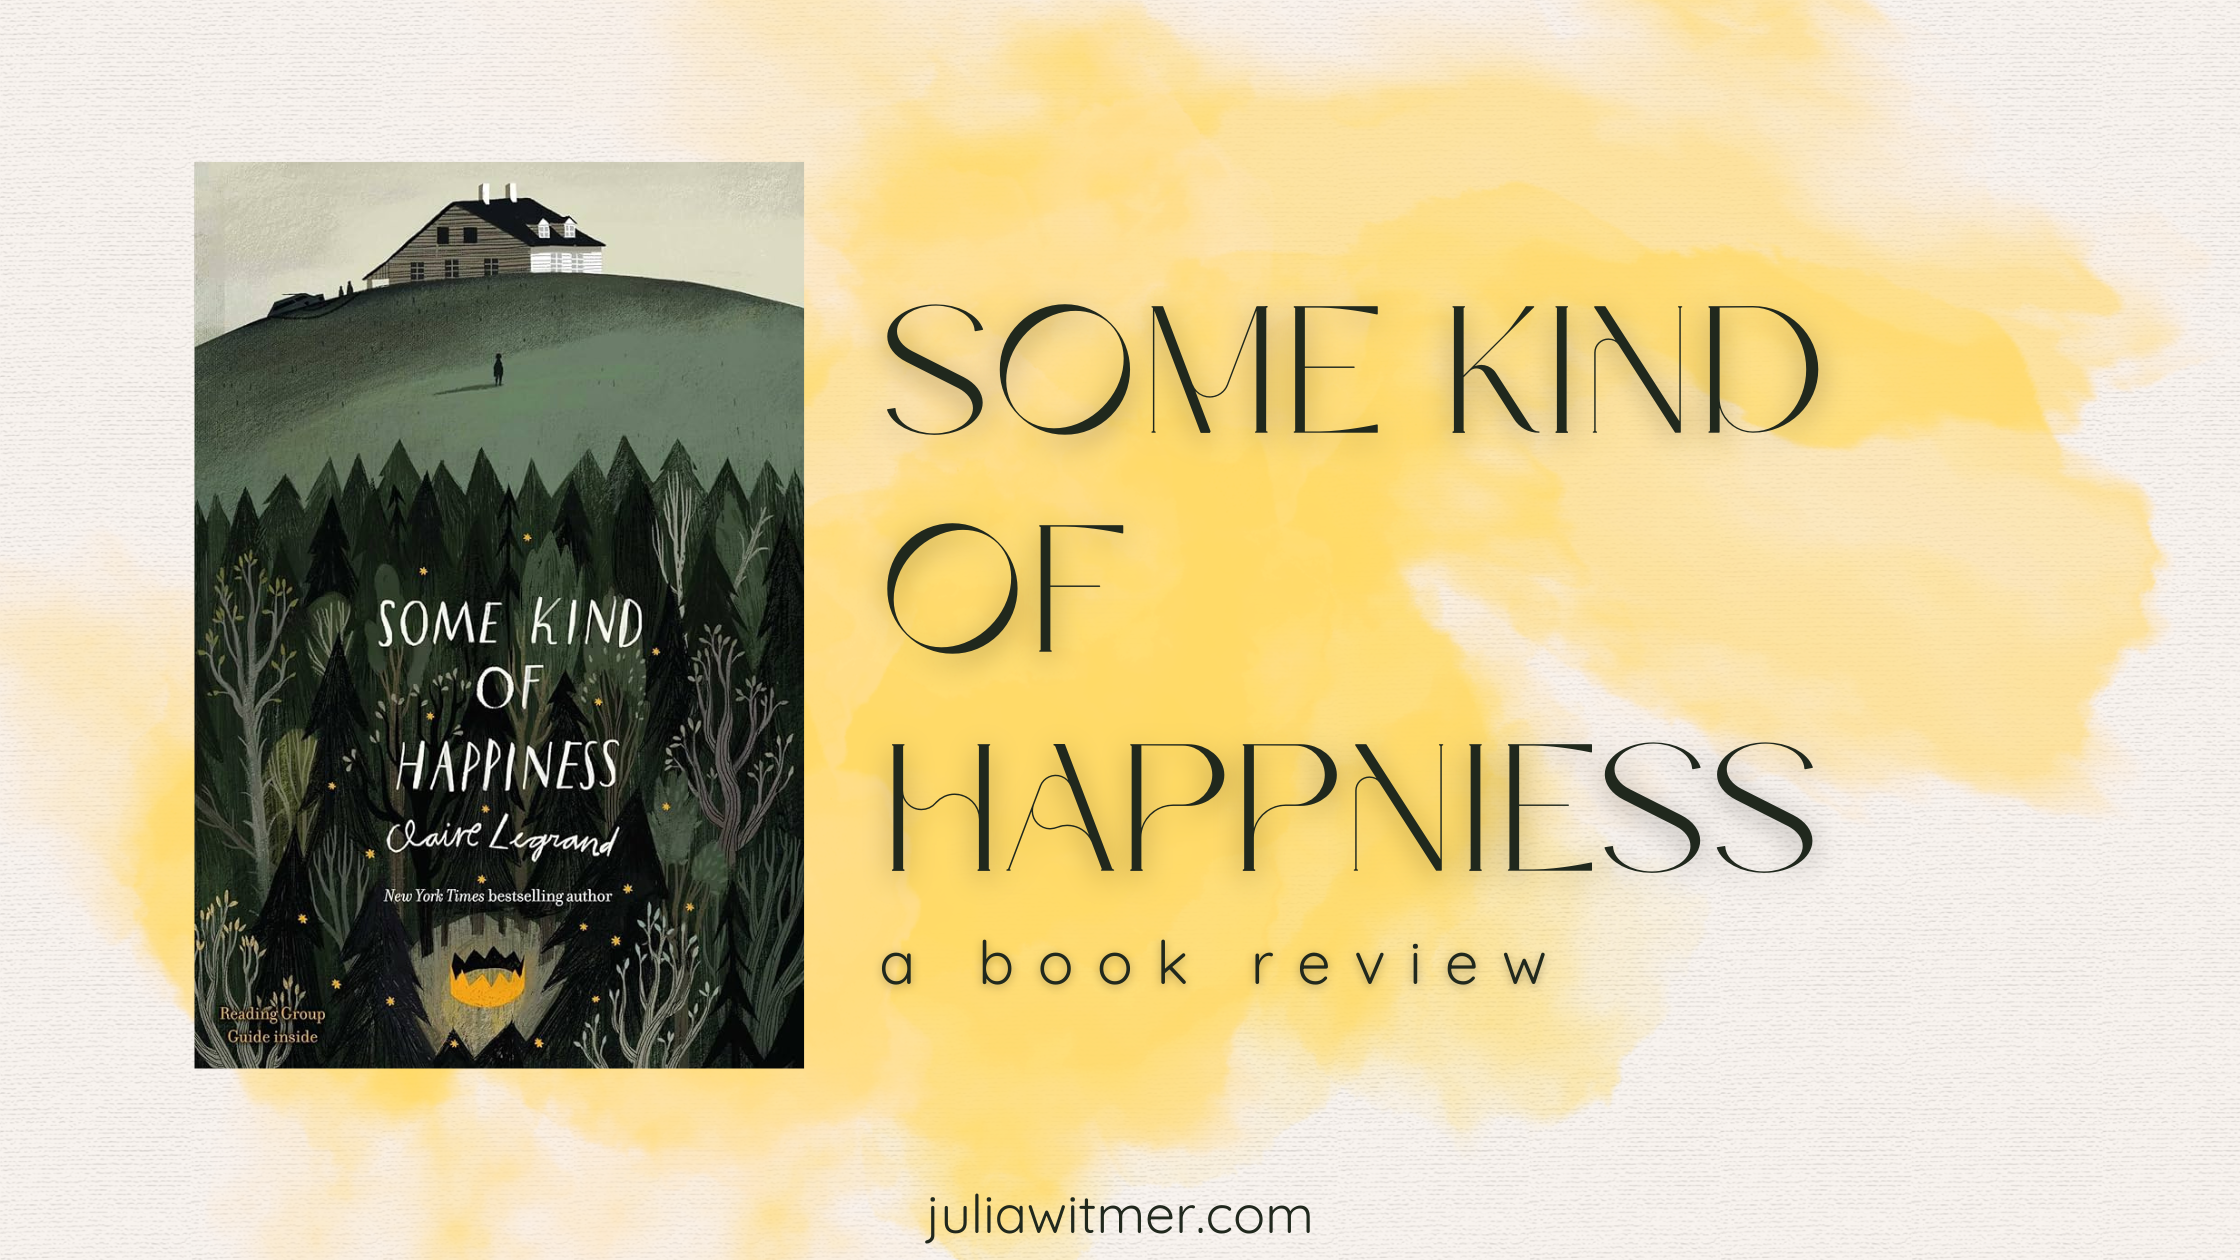 “Some Kind of Happiness” by Claire Legrand: A Book Review